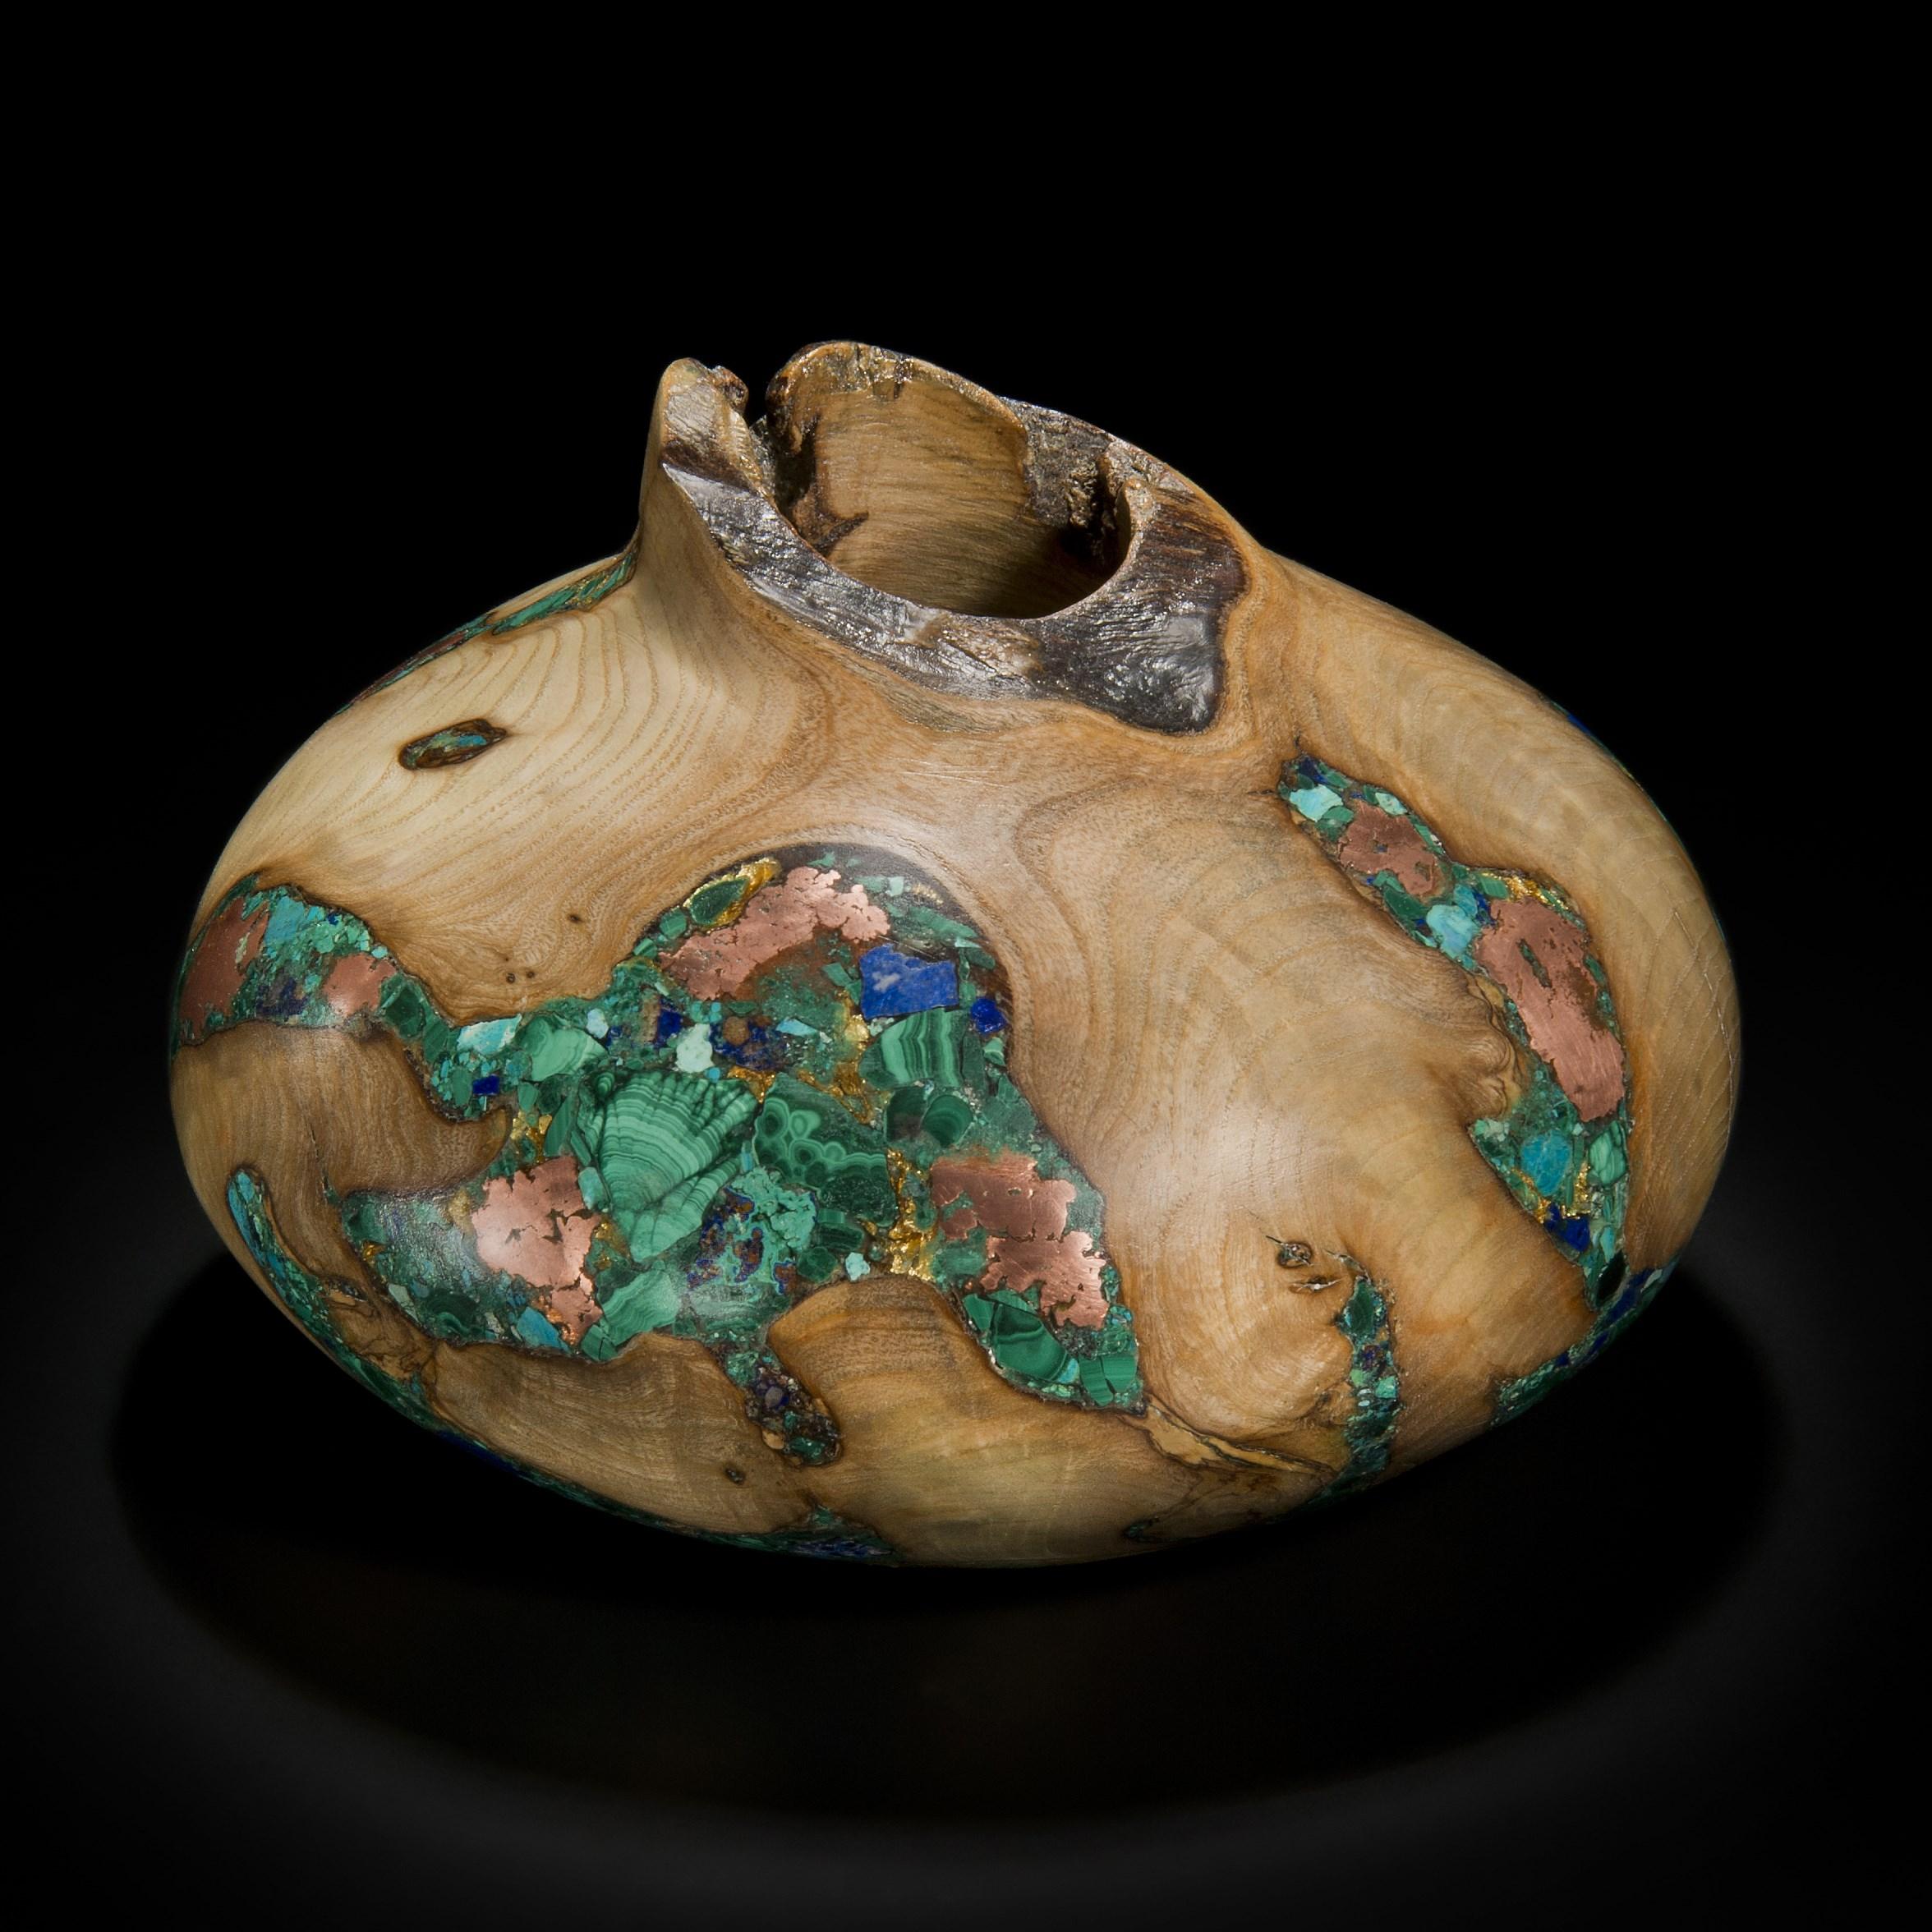 ‘Earthly Treasures No 30’ is a unique sculptural bowl by the British artist, Morrison Thomas. It is made from cankered Ash inlaid with Malachite, Chrysocolla, Lapis Lazuli, Native Copper and Gold.

Morrison turns beautiful wooden spheres from